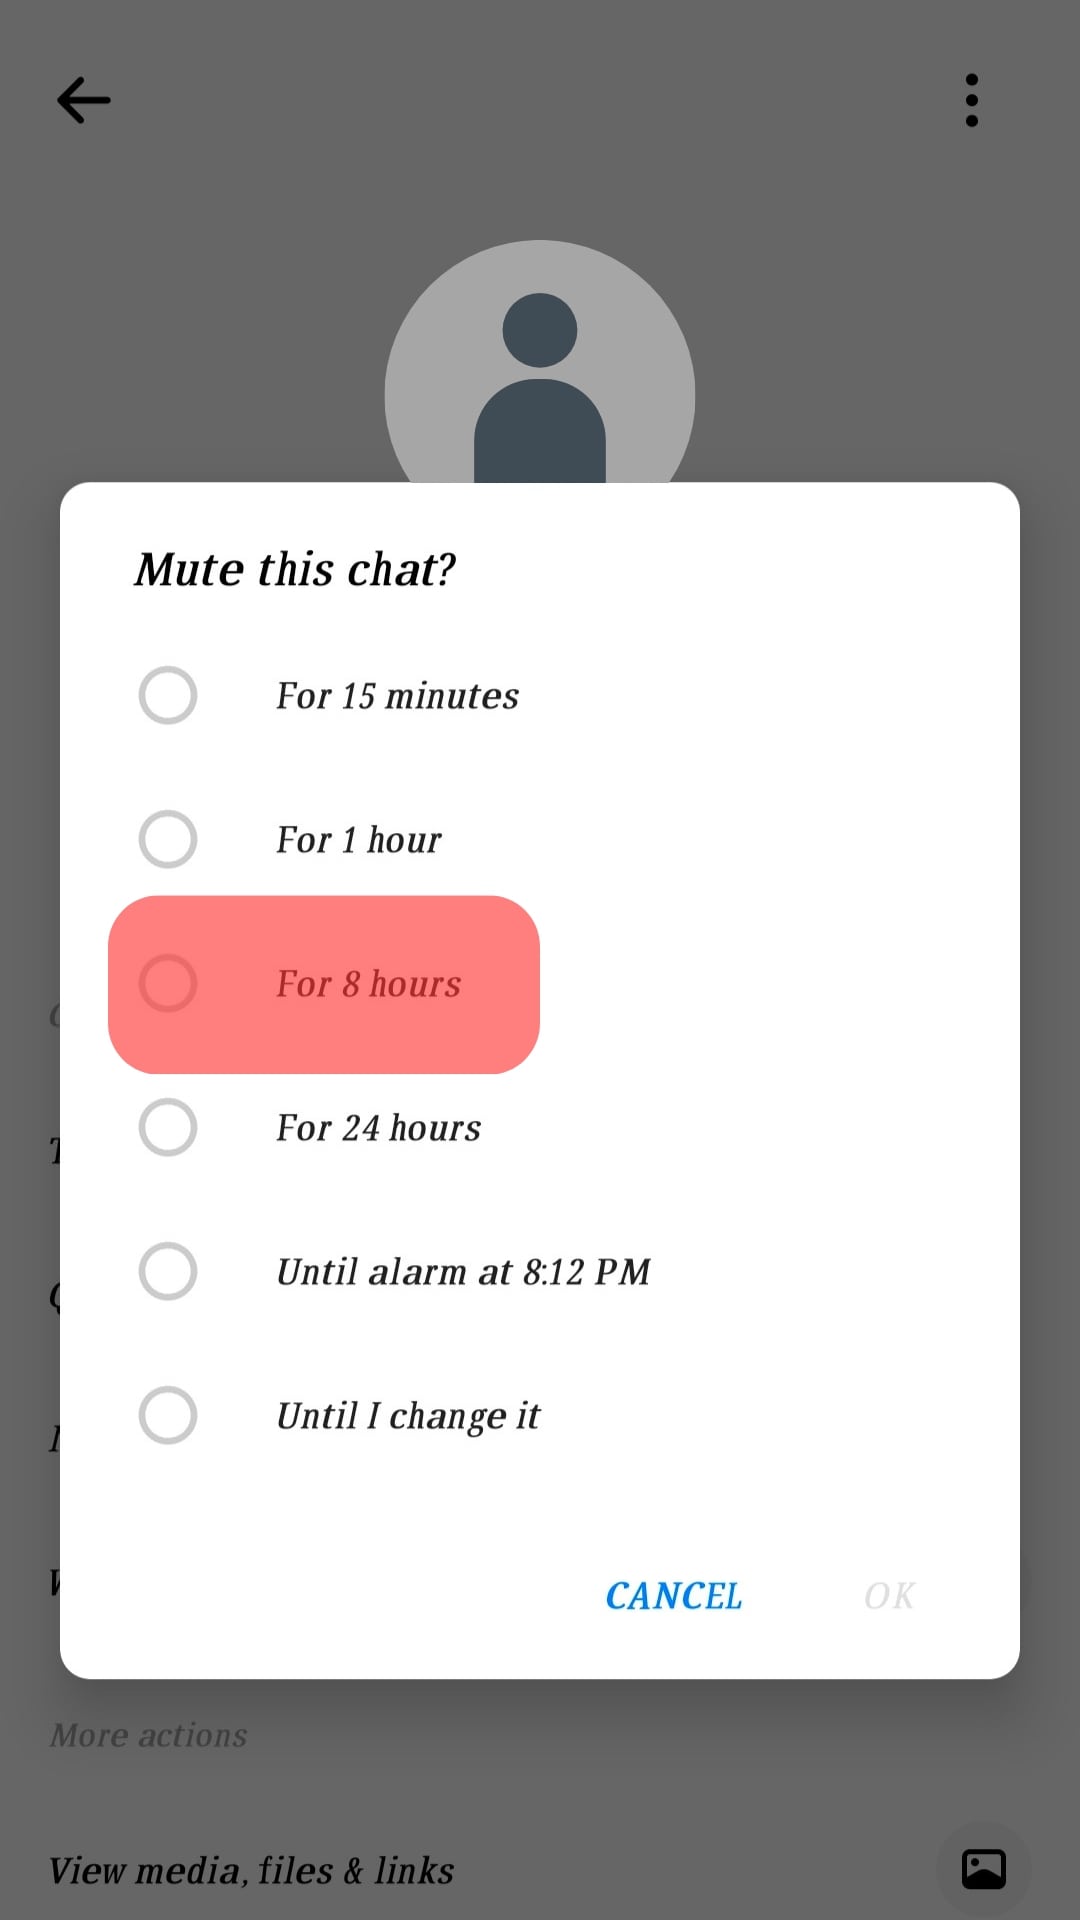 Choose How Long To Mute The Conversation